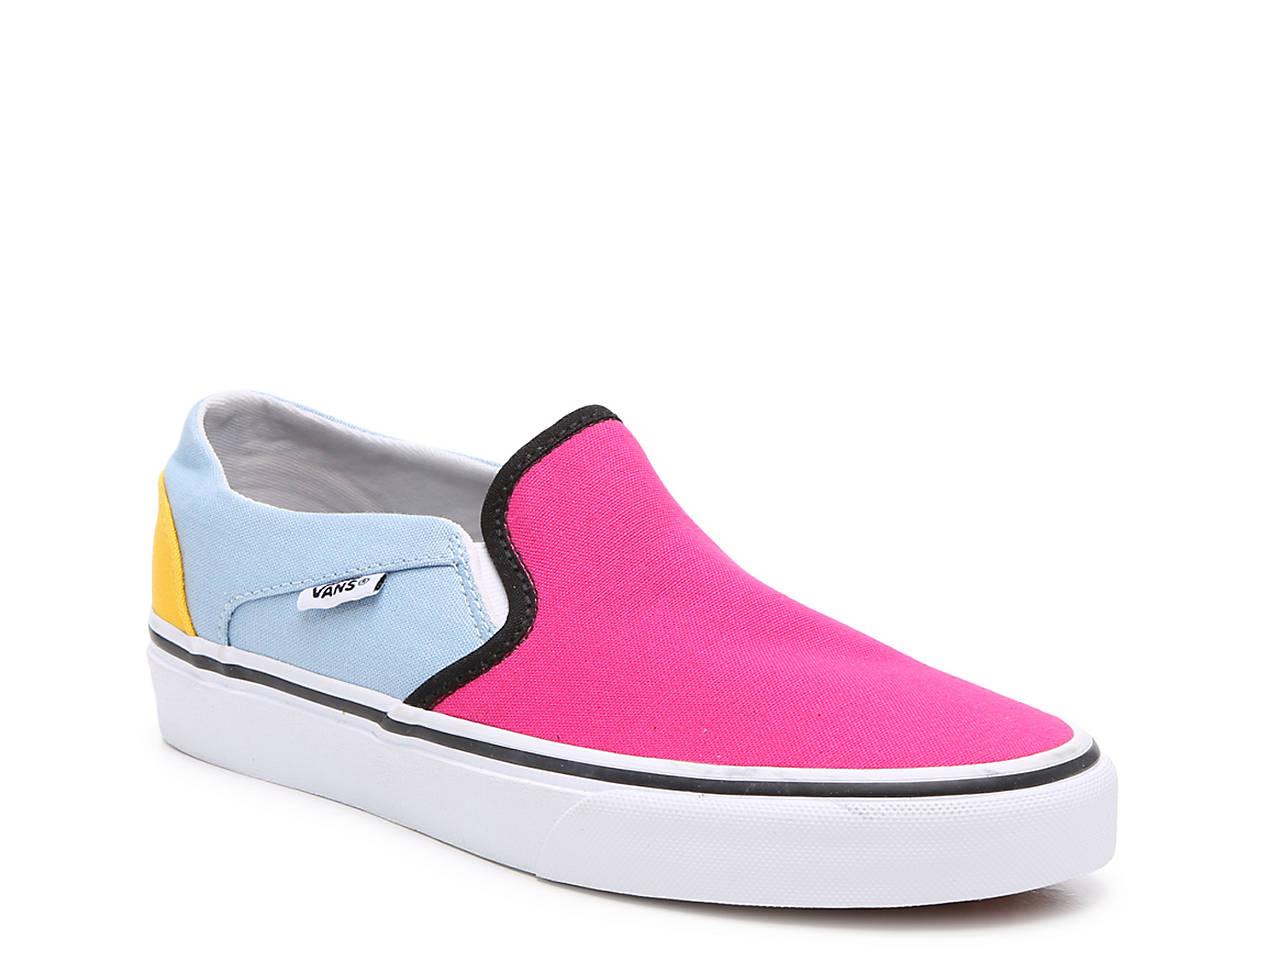 Vans Canvas Asher Slip-on Sneaker in Pink/Blue/Yellow (Pink) - Lyst